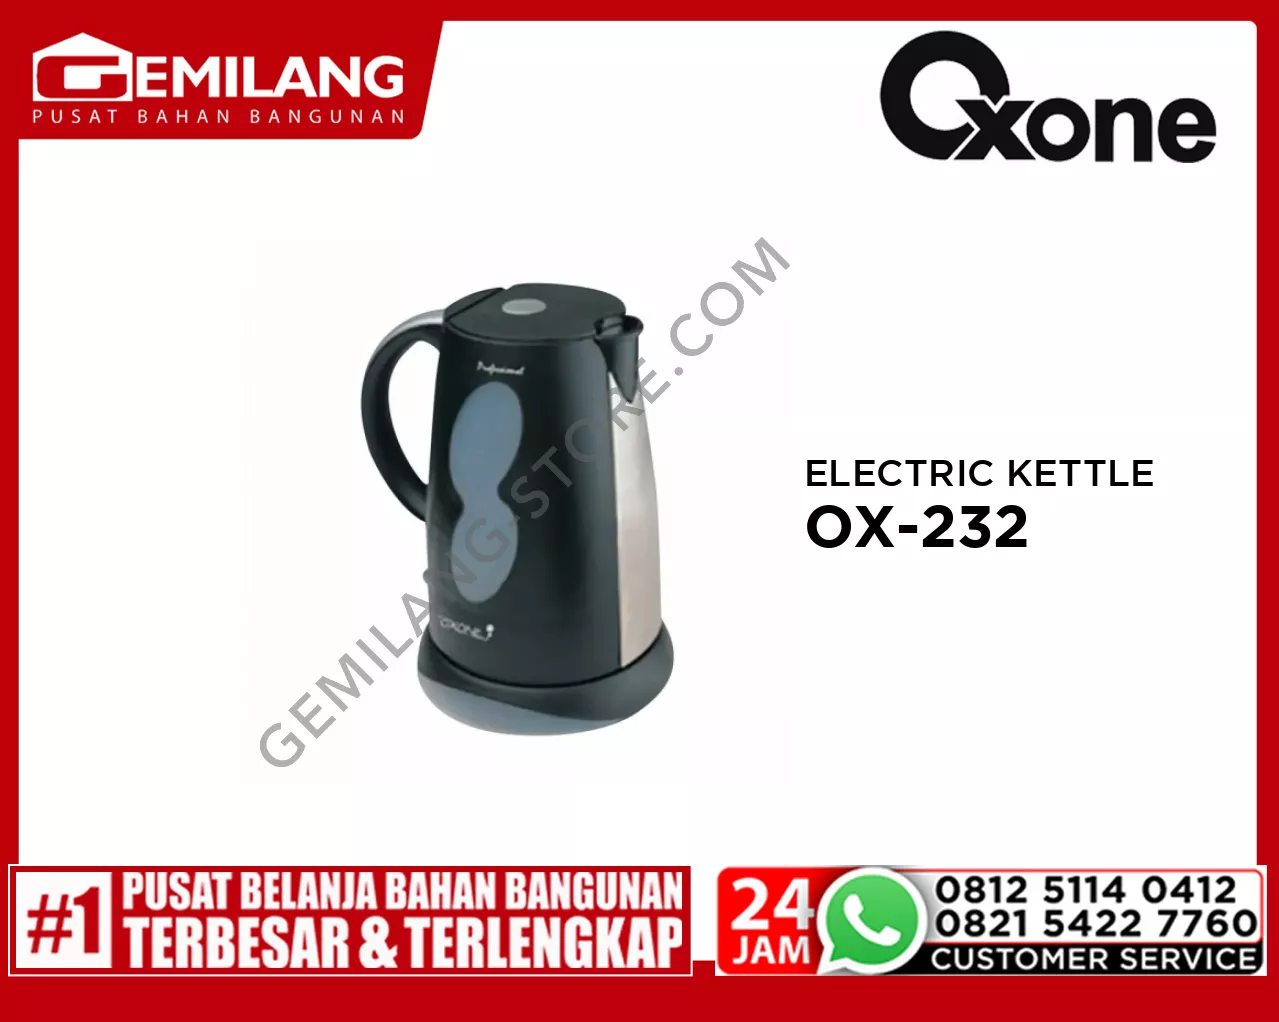 OXONE ELECTRIC KETTLE OX-232